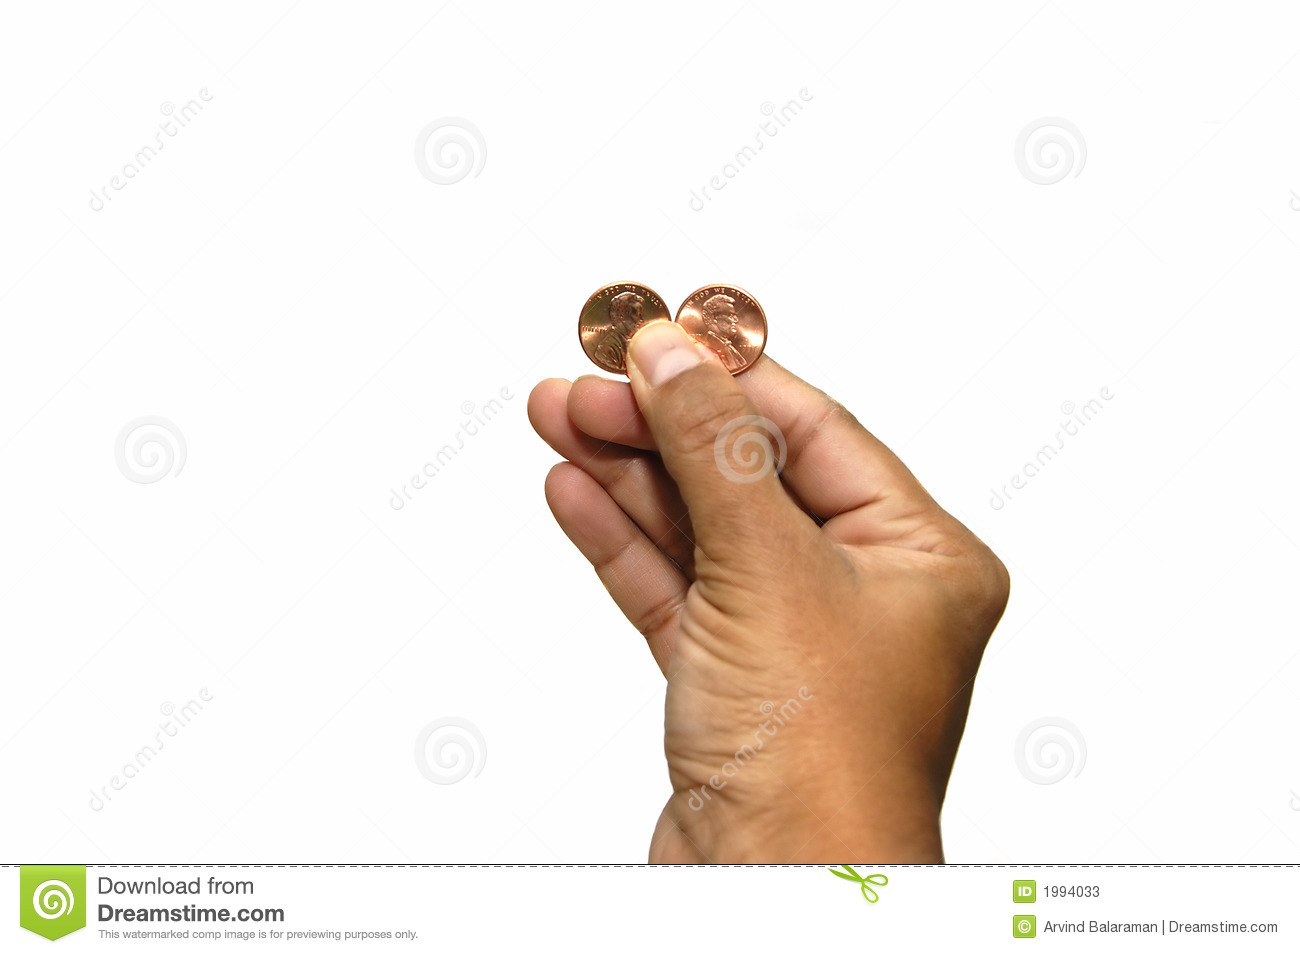 Hand Holding Two Cents Isolated Against A White Background